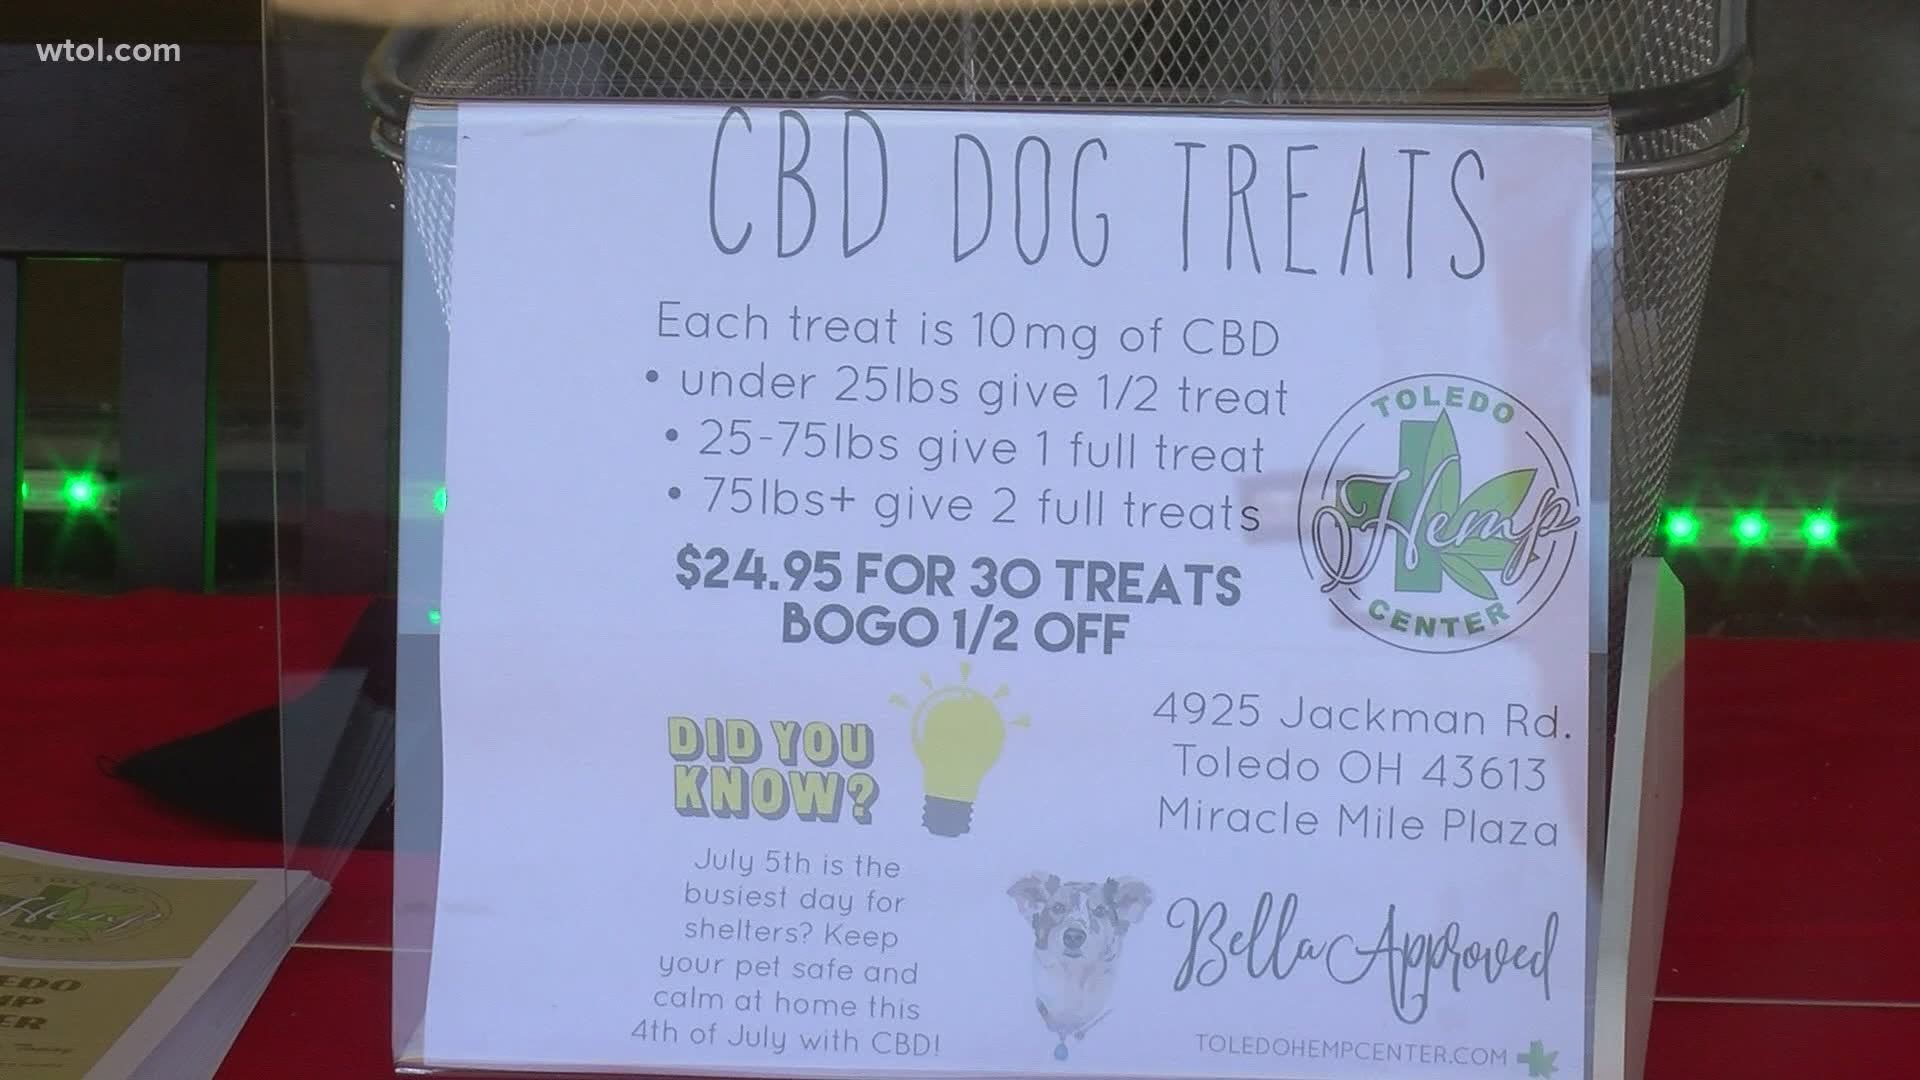 The Toledo Hemp Center is offering a 3 day event, giving away 500 CBD dog treats to help pets that may experience anxiety during fireworks this holiday weekend.